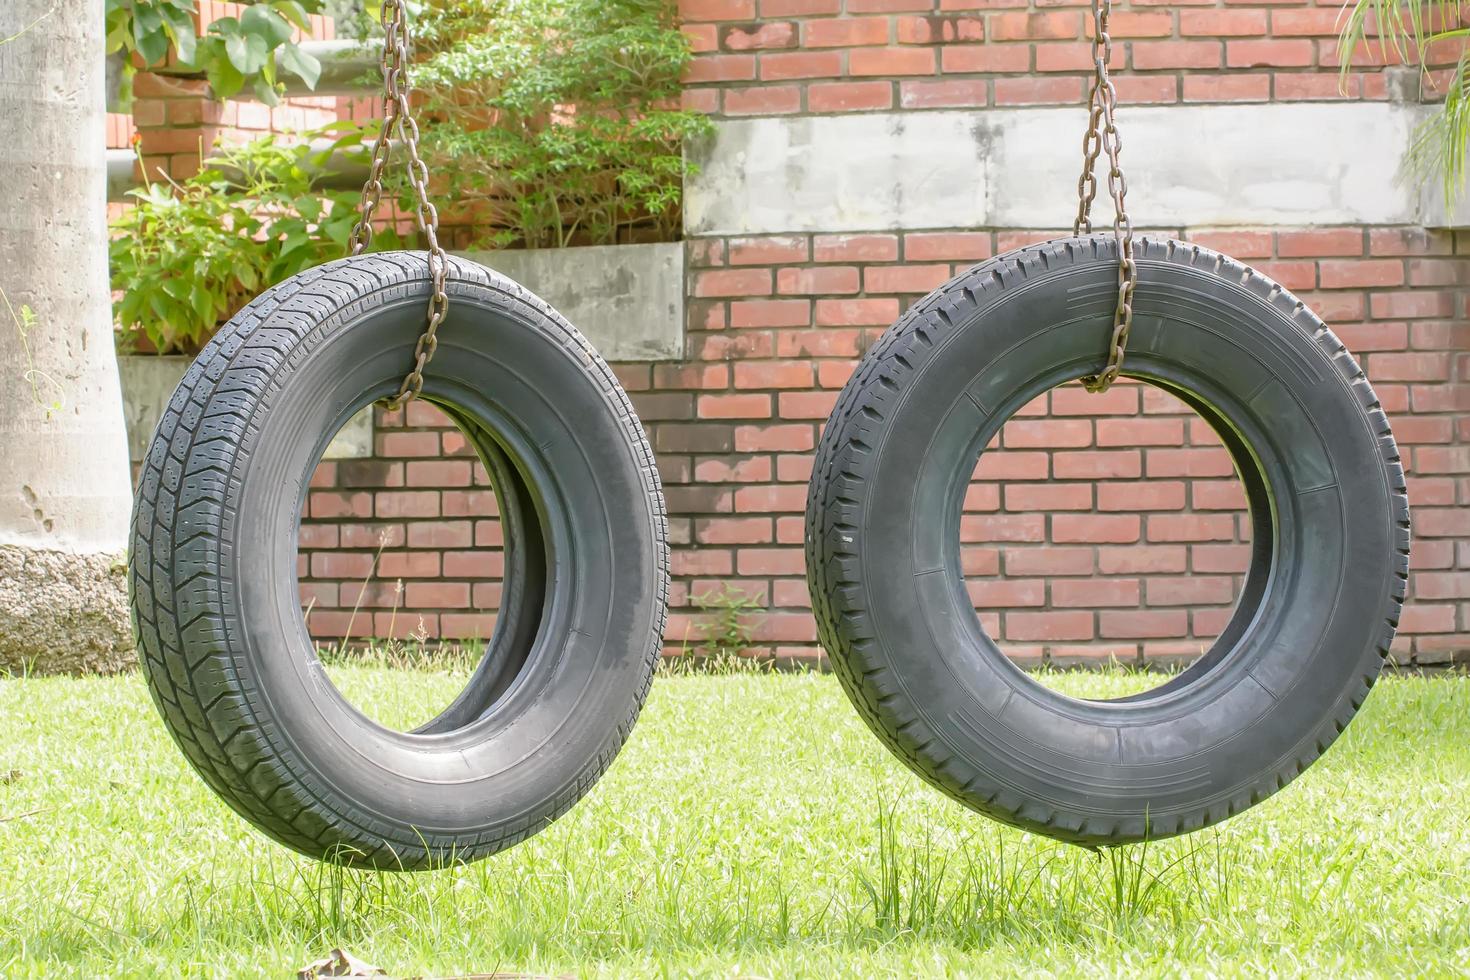 Old tires modify the swing photo